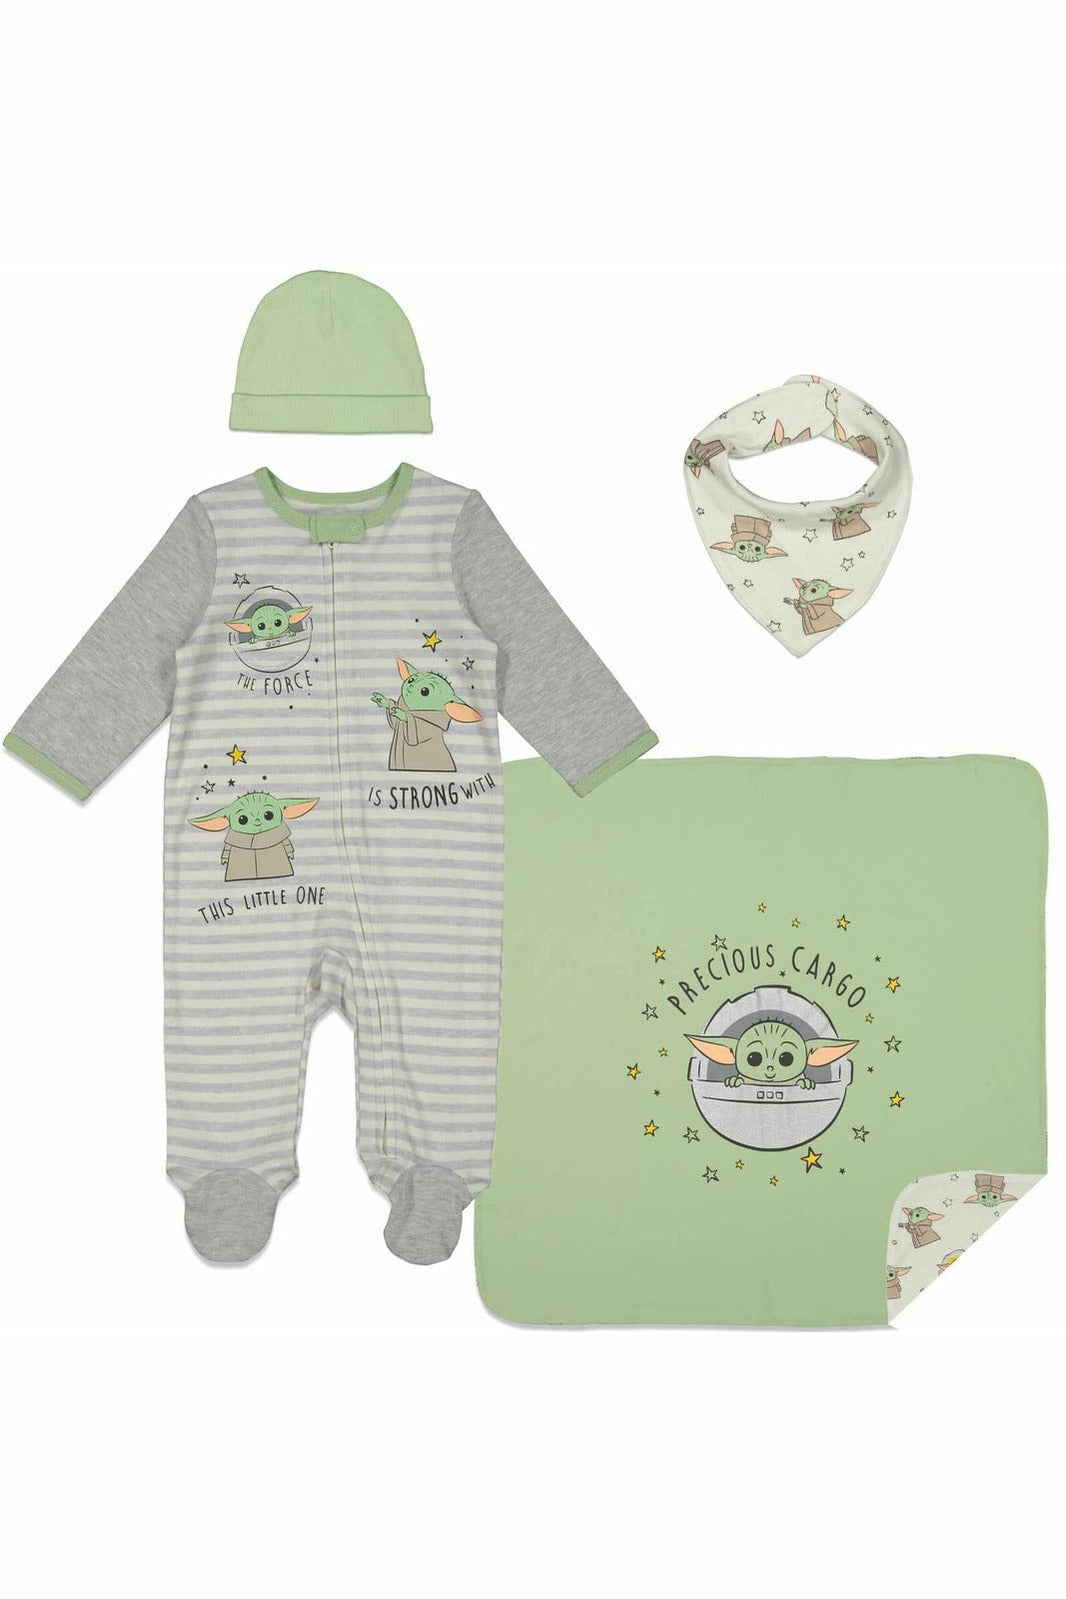 Baby Yoda 4 Piece Outfit Set: Sleep N' Play Coverall Bib Blanket Hat